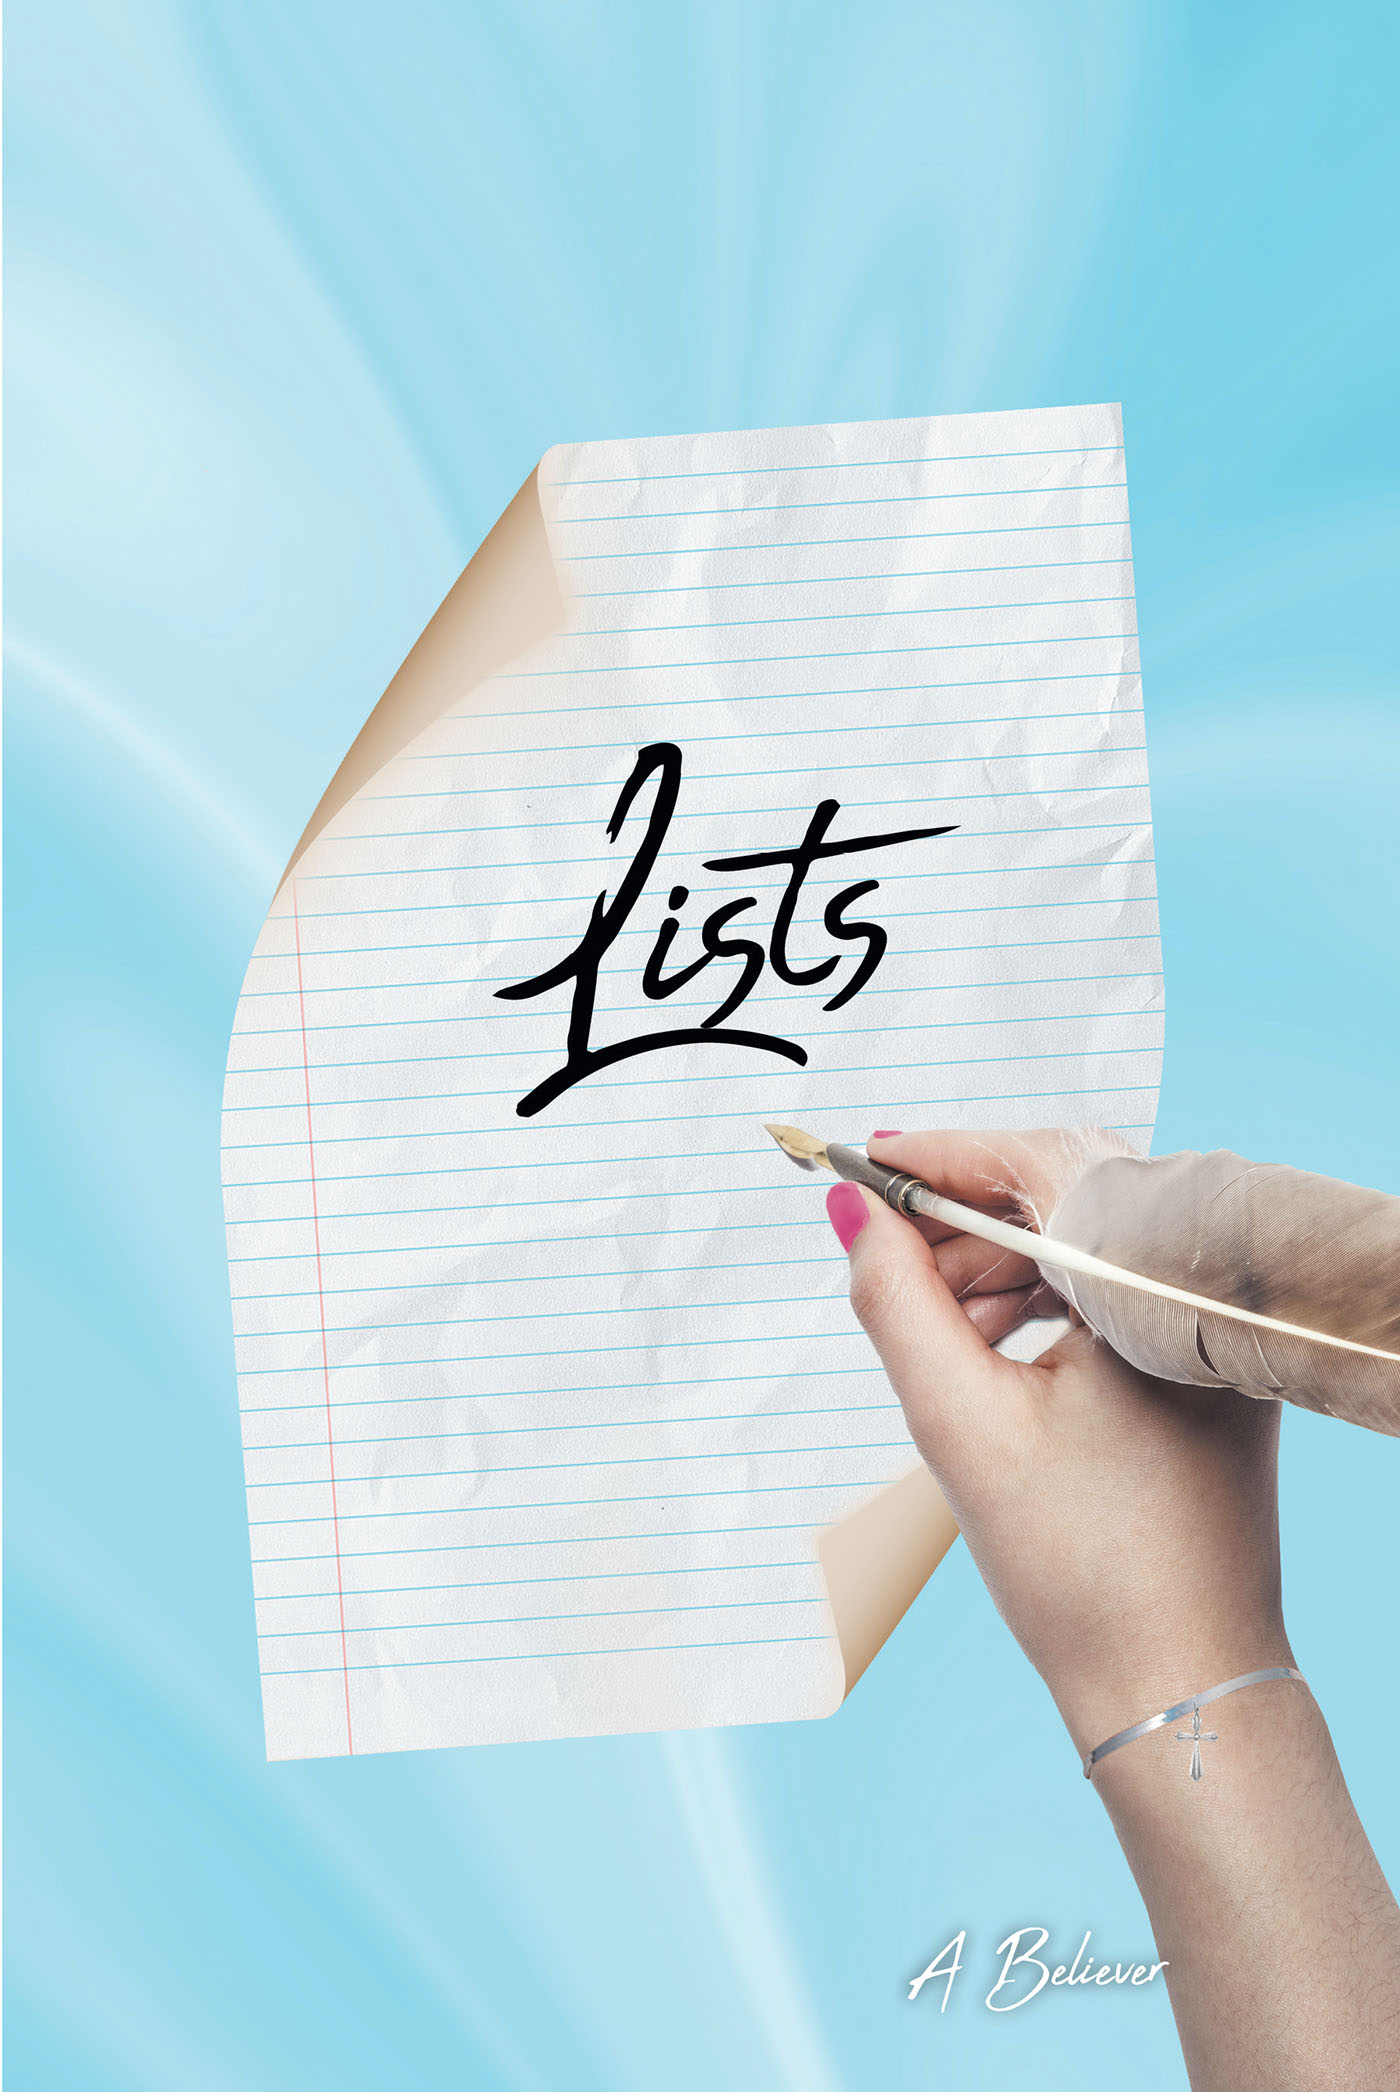 A Believer’s Newly Released "Lists" is a Thoughtful Exploration of the Spiritual Lessons and Thoughts Within the Author’s Life